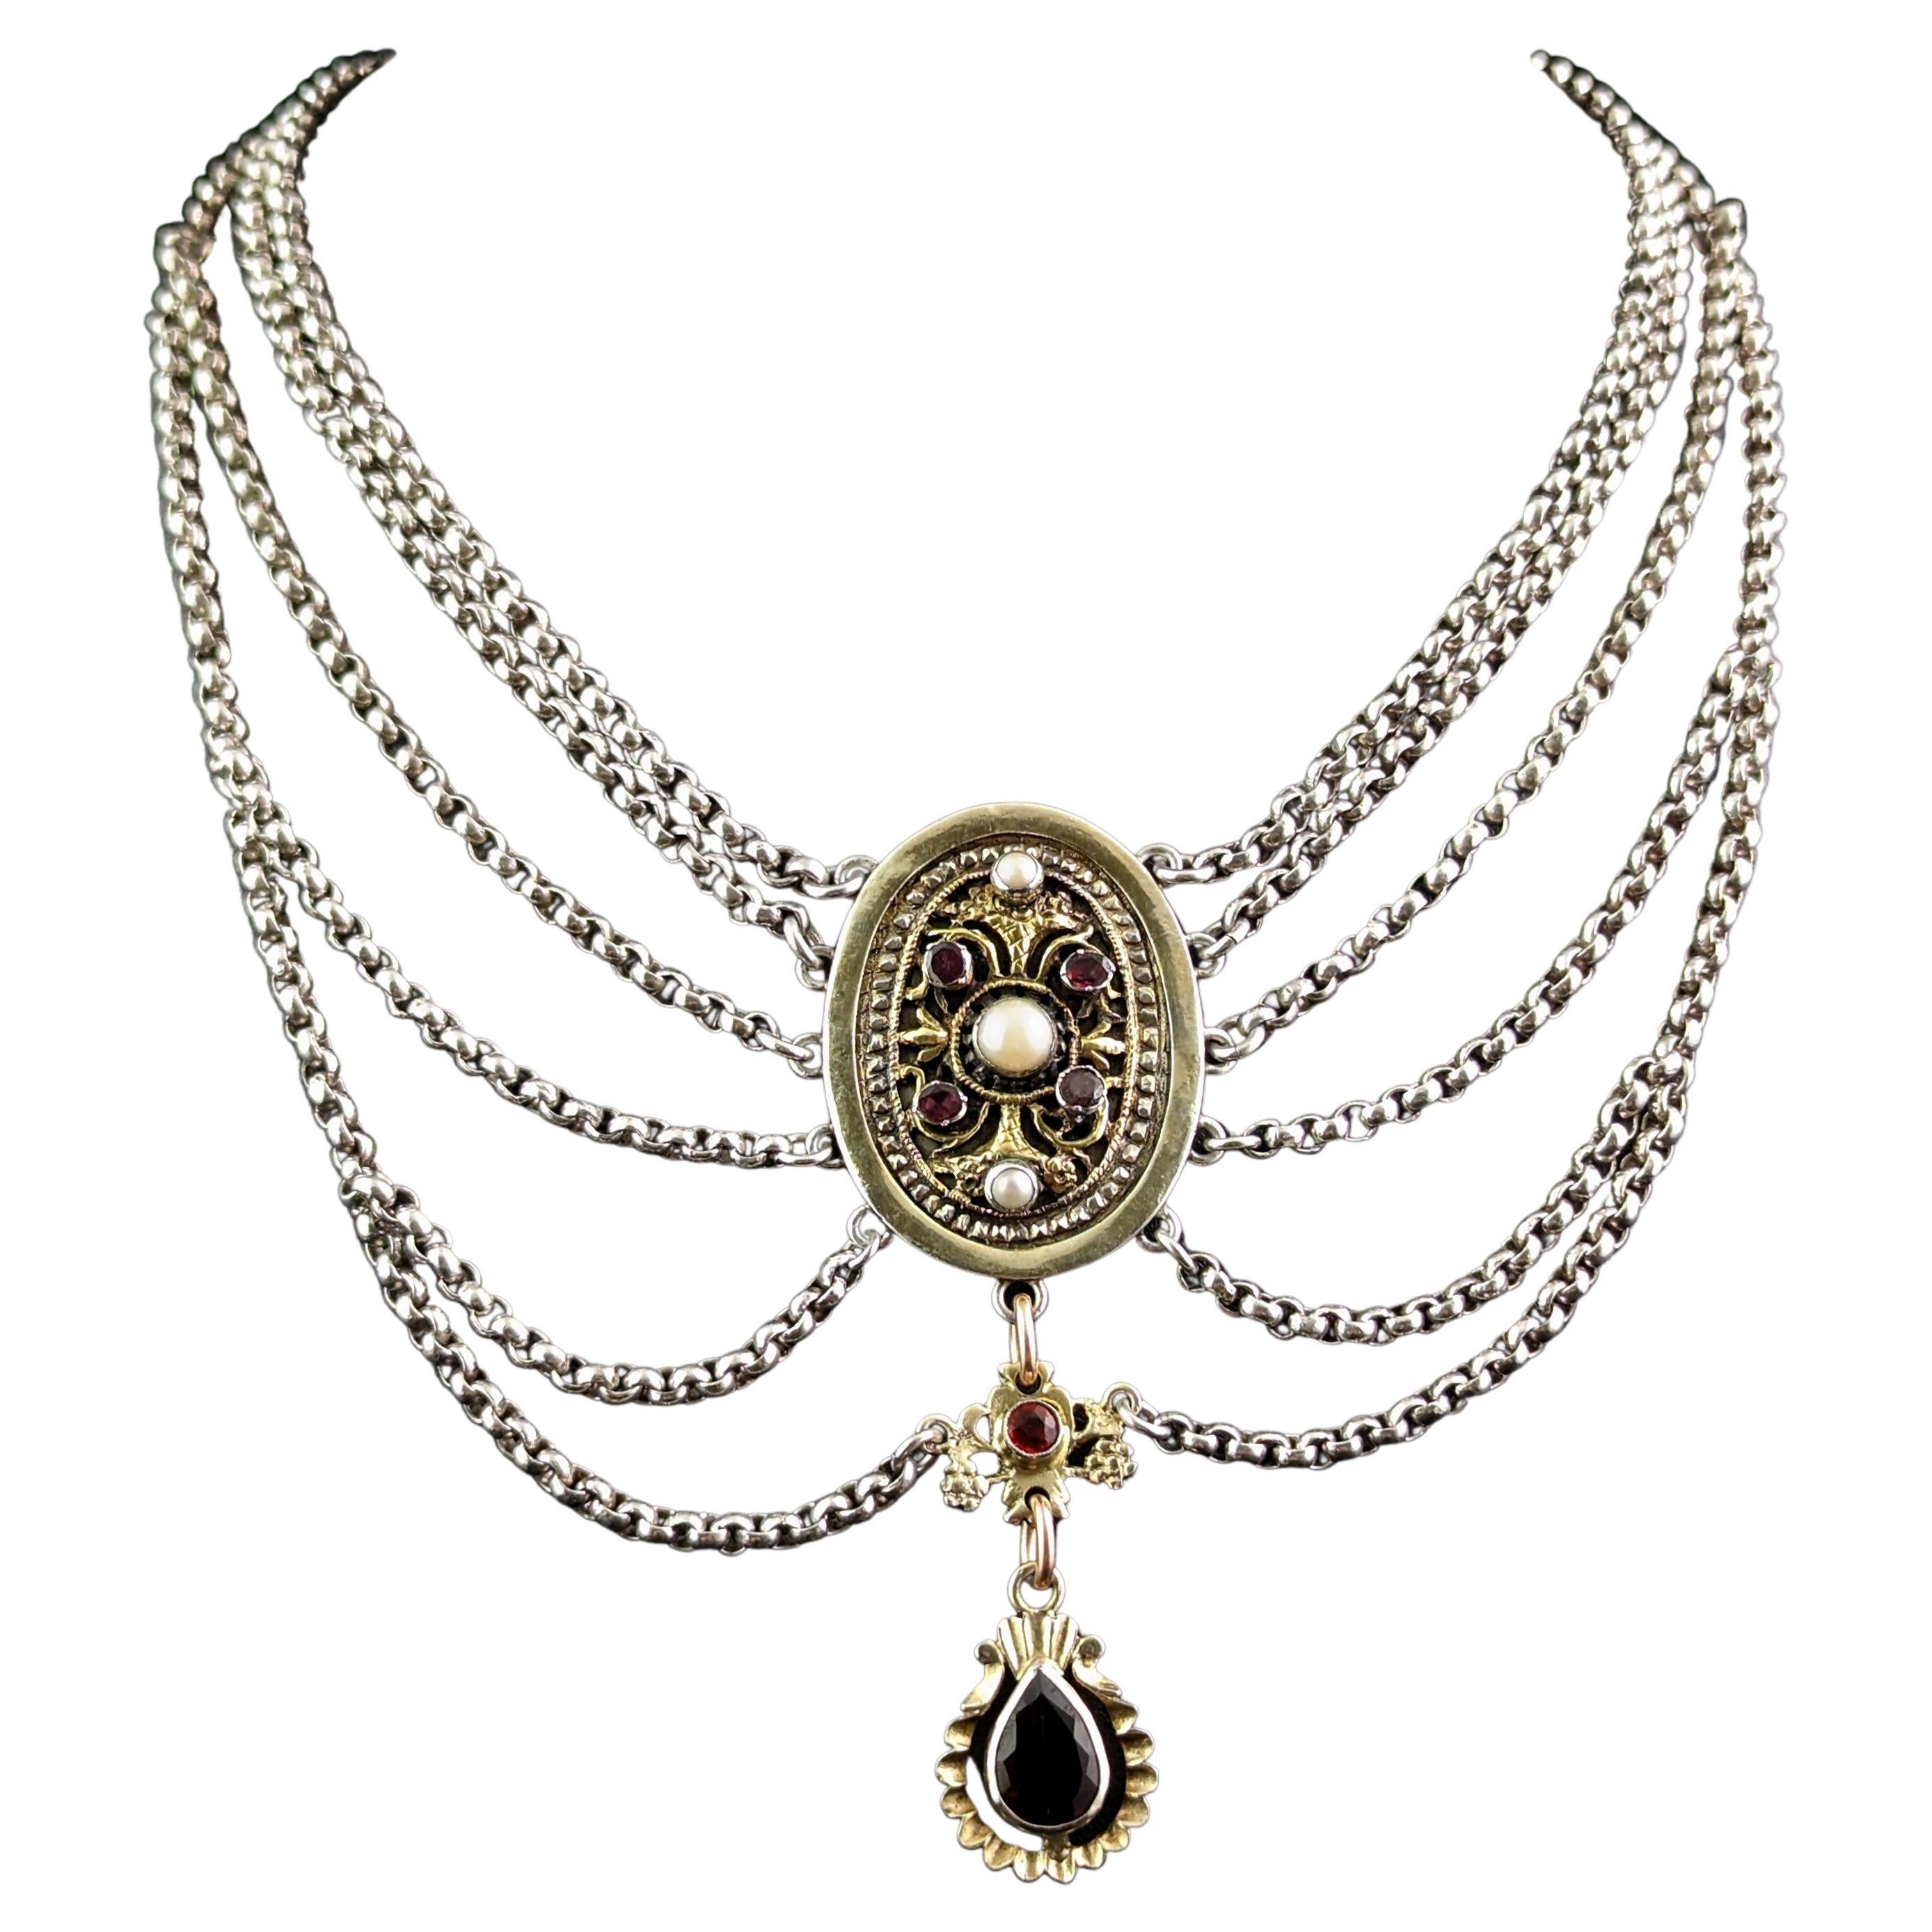 Antique Austro-Hungarian Festoon Necklace, Silver, Garnet, Pearl and Paste